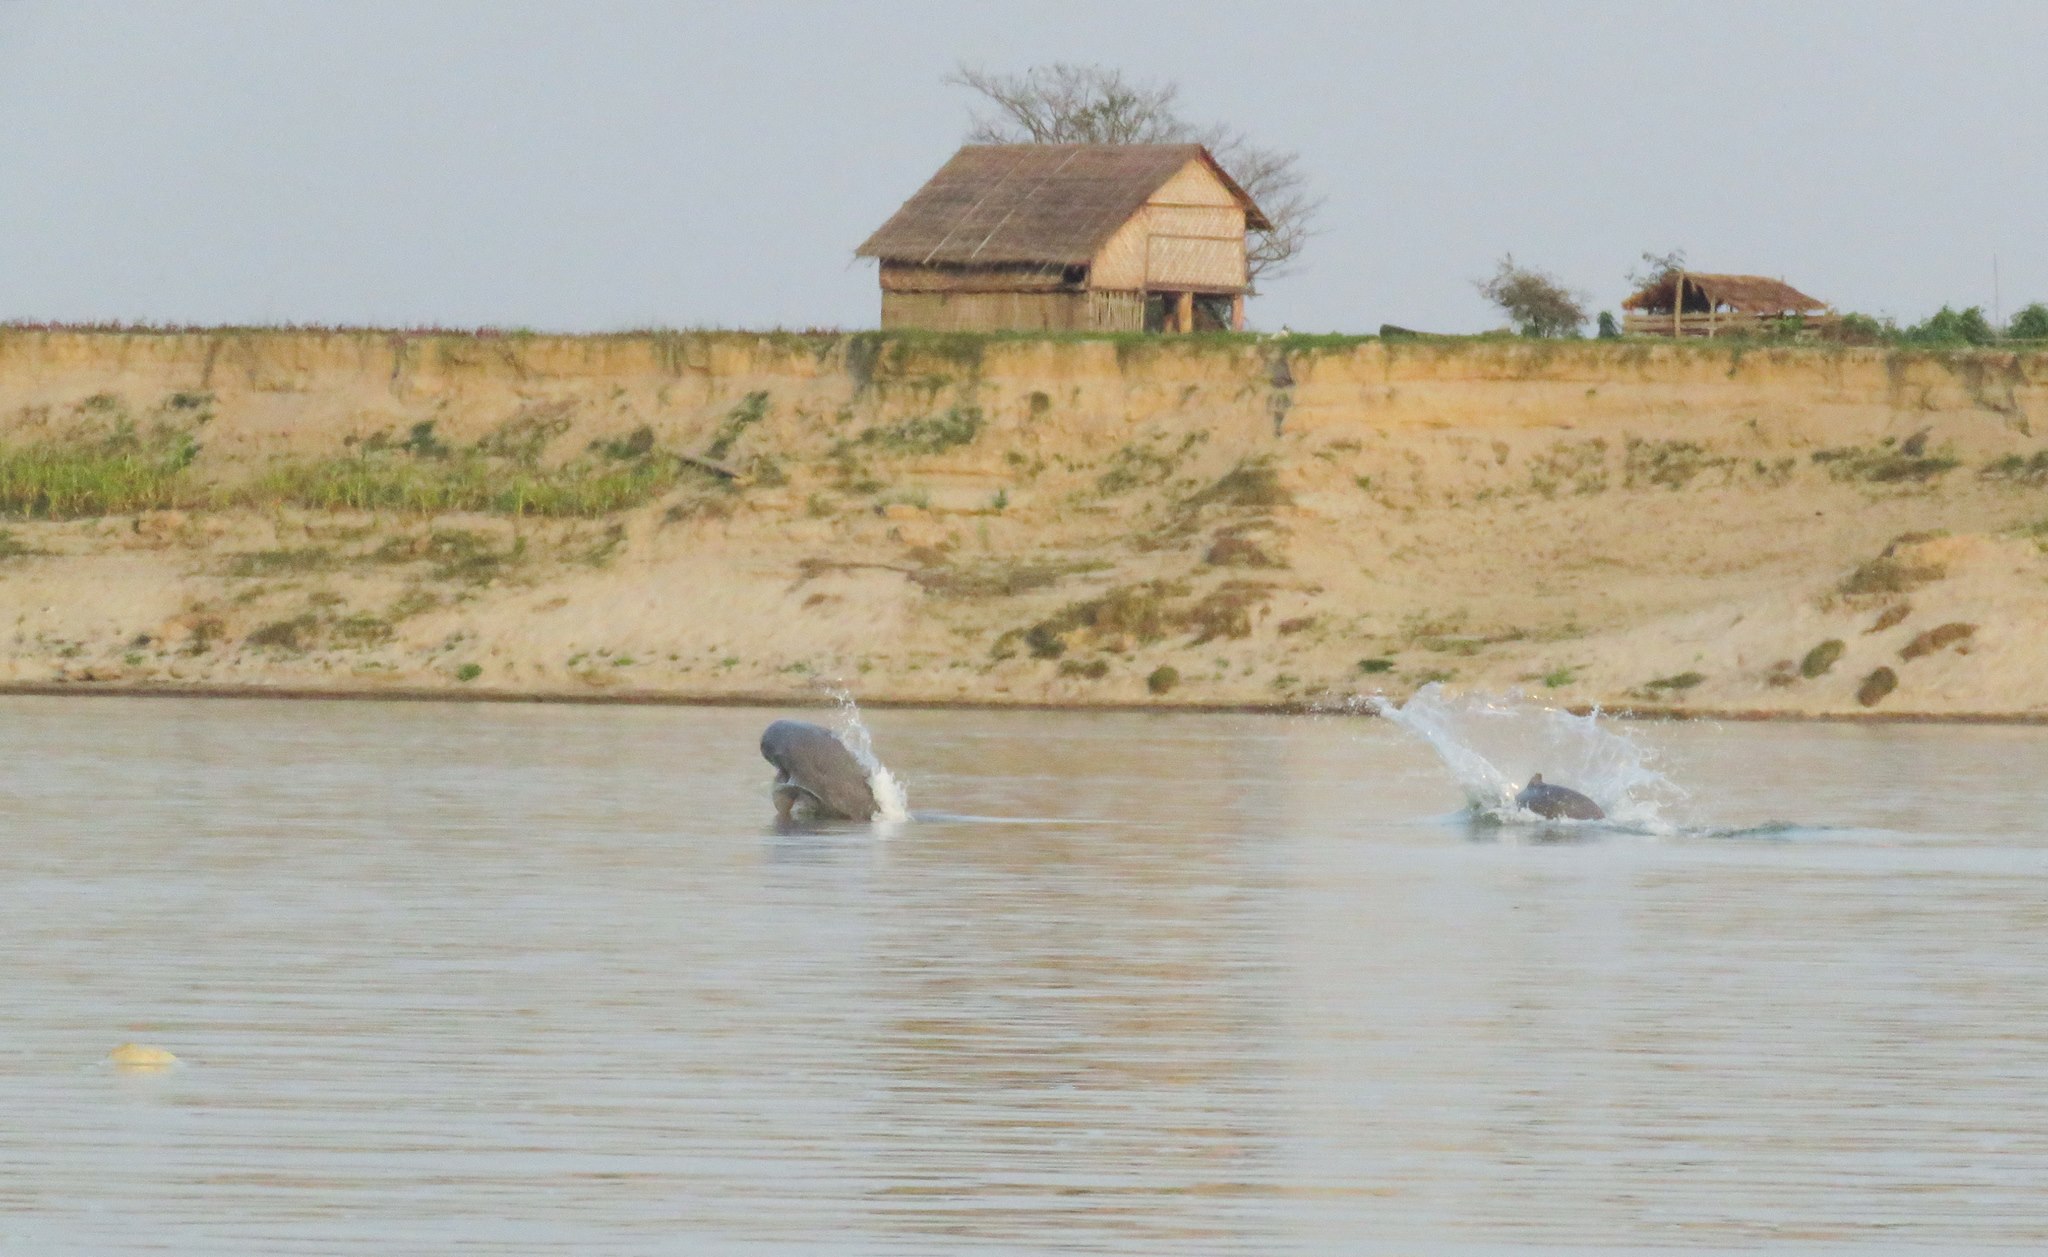 Irrawaddy dolphins observed by a survey team on the Ayeyawady River. Photo: WCS